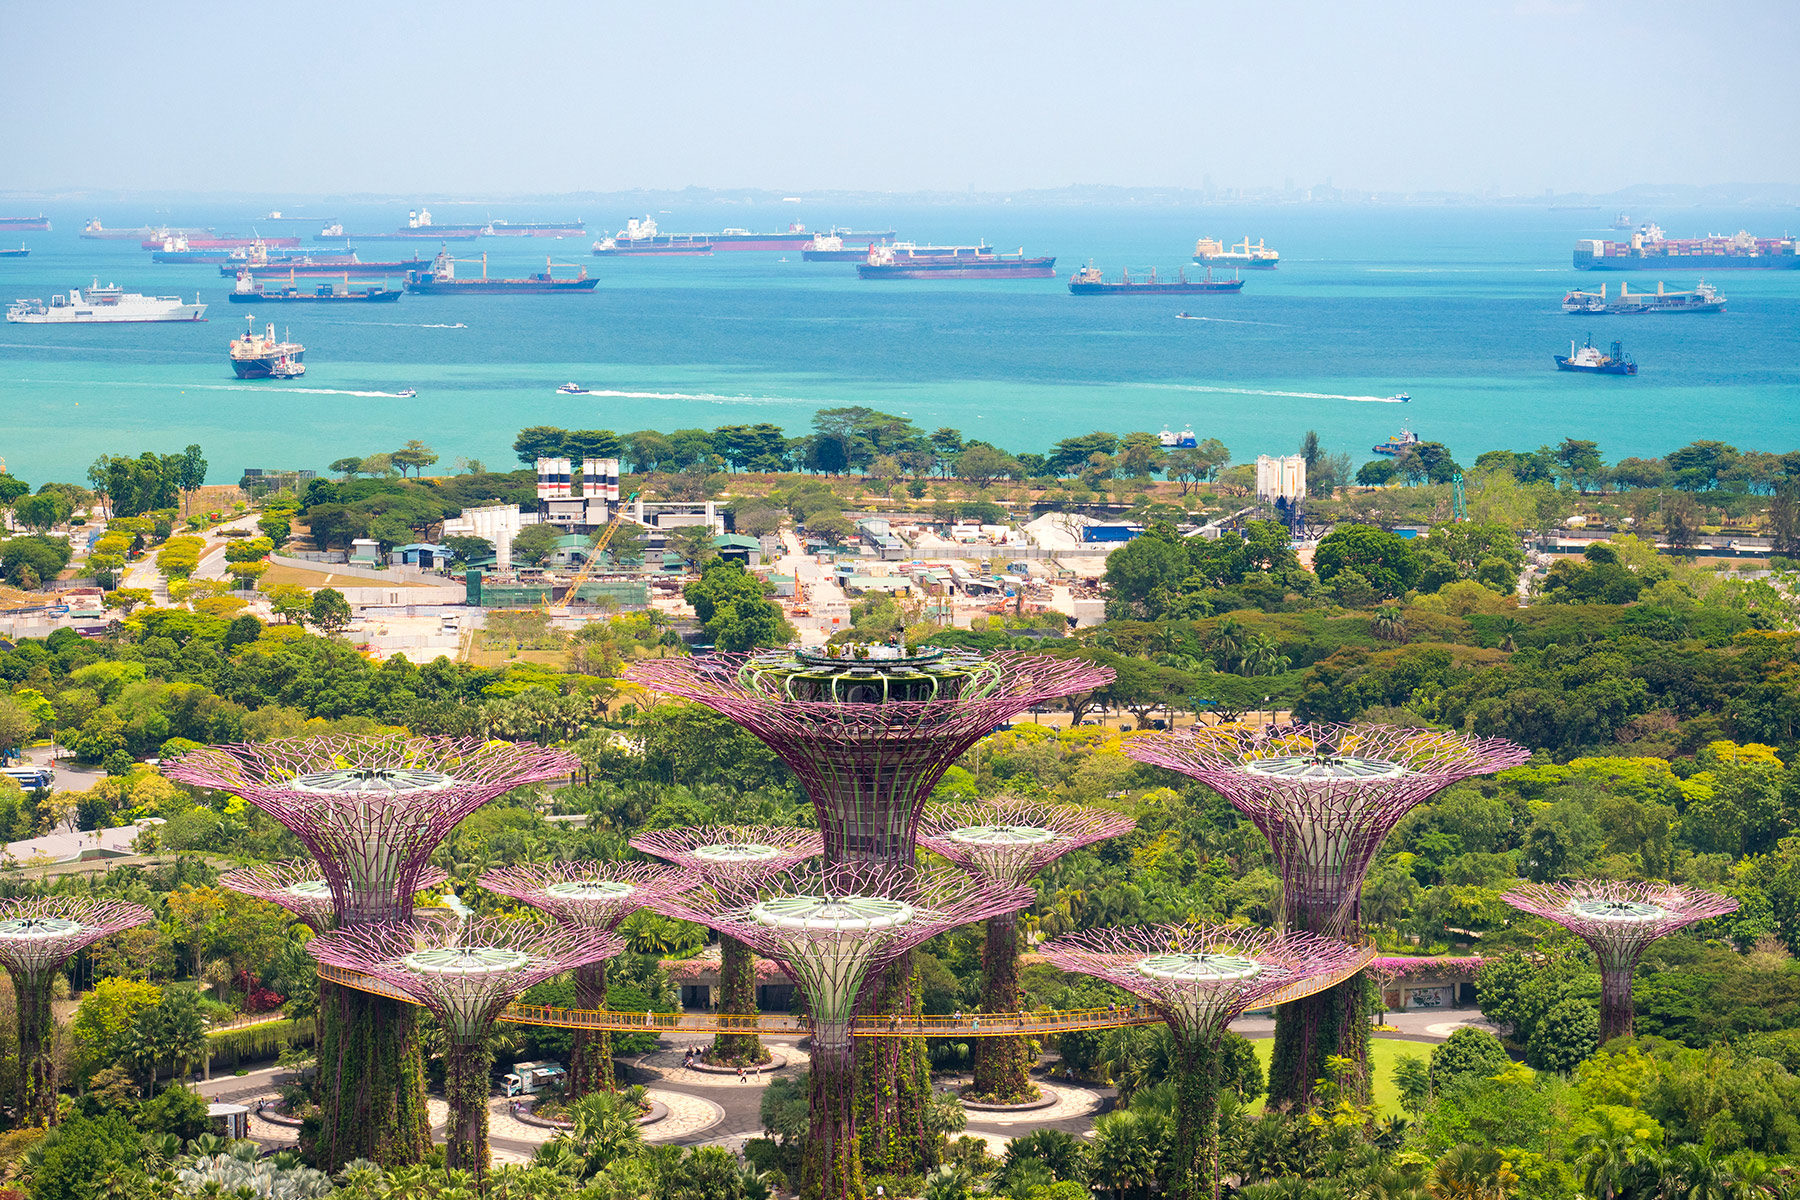 Ships in the distance, view from above of Gardens by the Bay